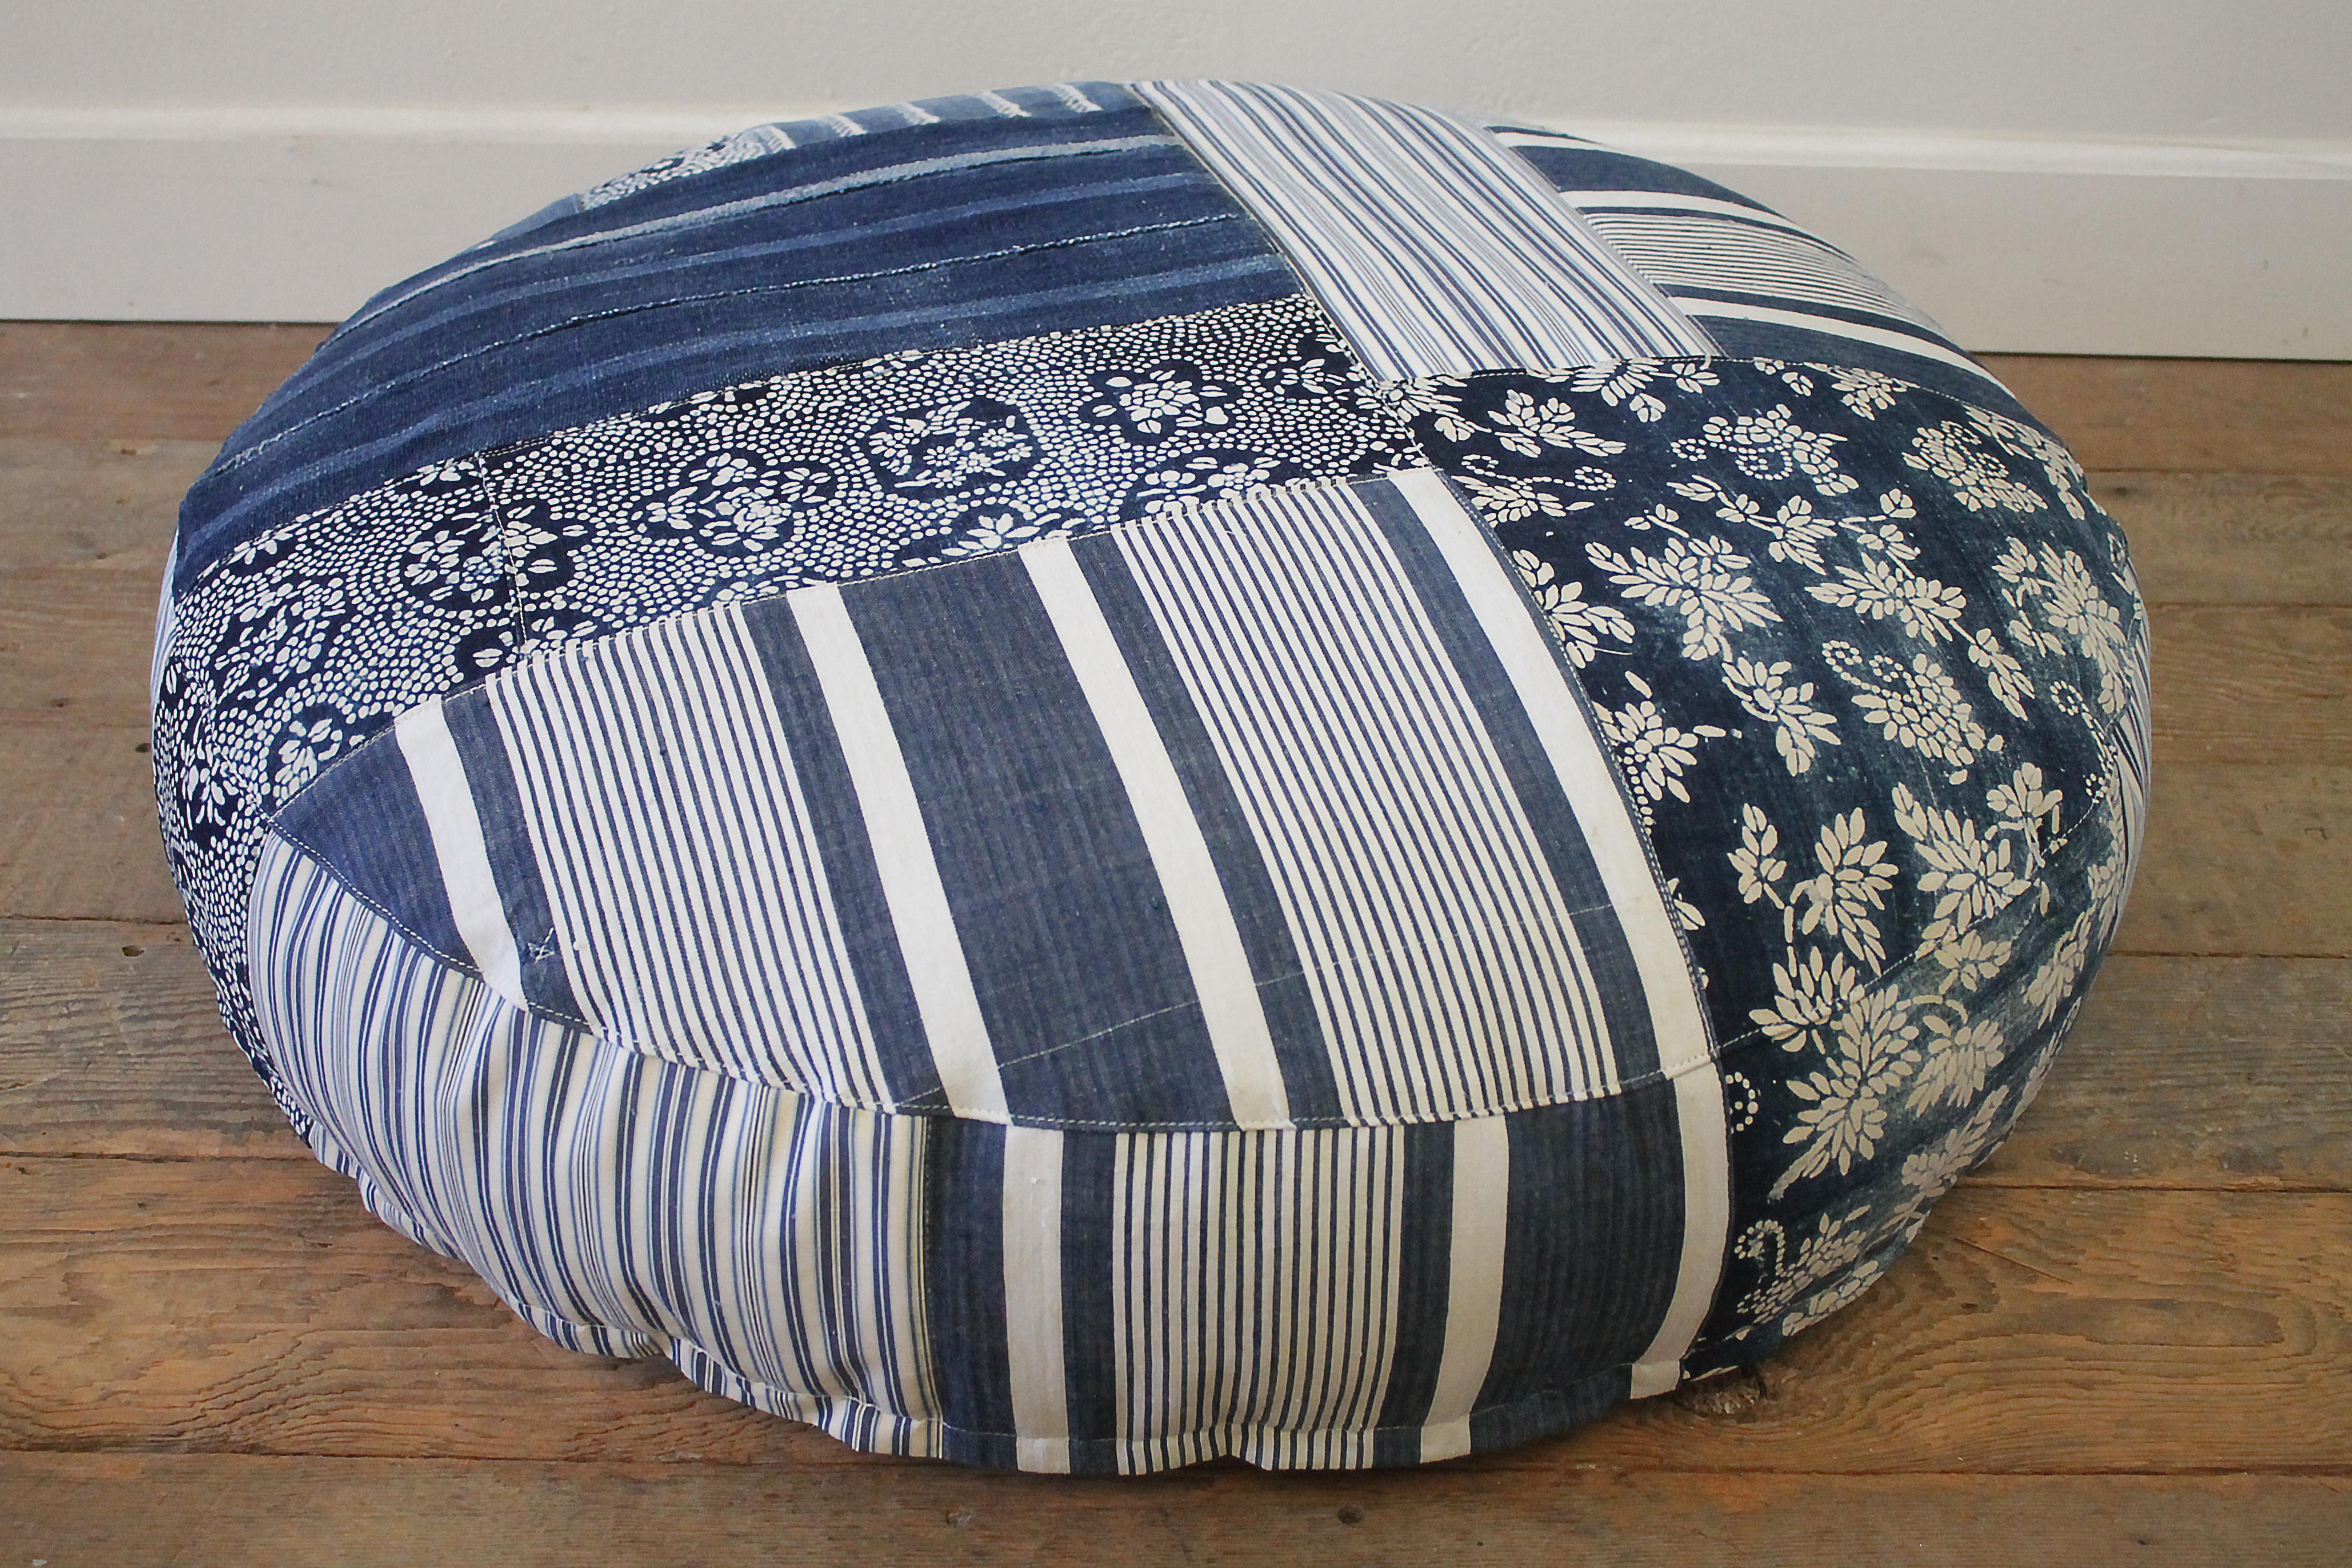 Round pet bed made from vintage batik mud cloth indigo textiles.
Custom-made in our Full Bloom Cottage studio, from vintage and antique textiles. A French mattress ticking stripe, antique Japanese batik, and African mud cloths make up this ultra